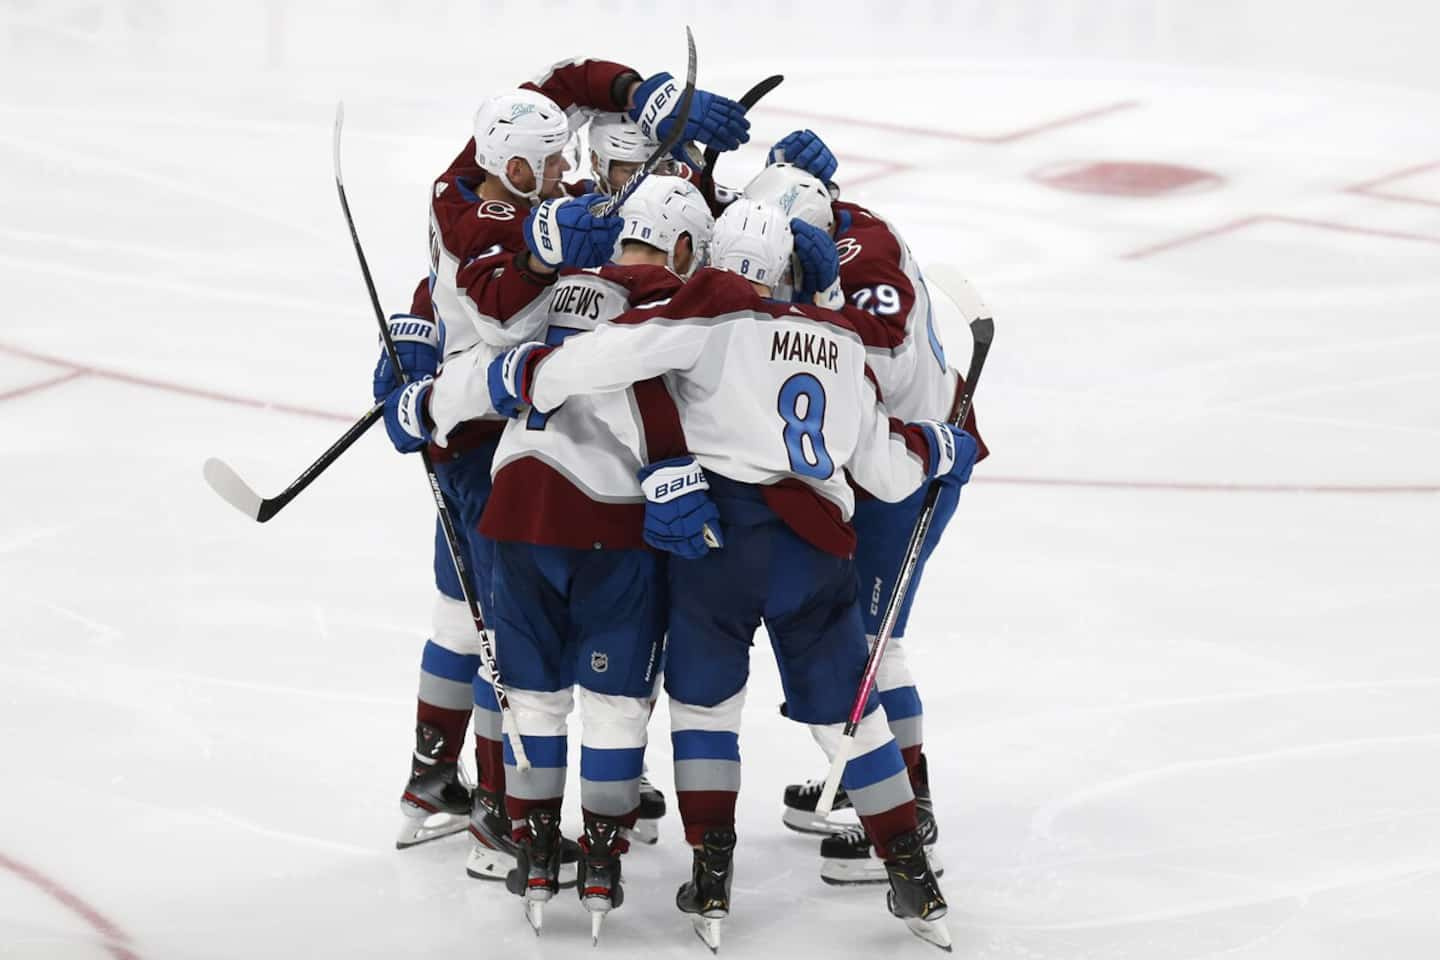 A profitable rest for the Avalanche